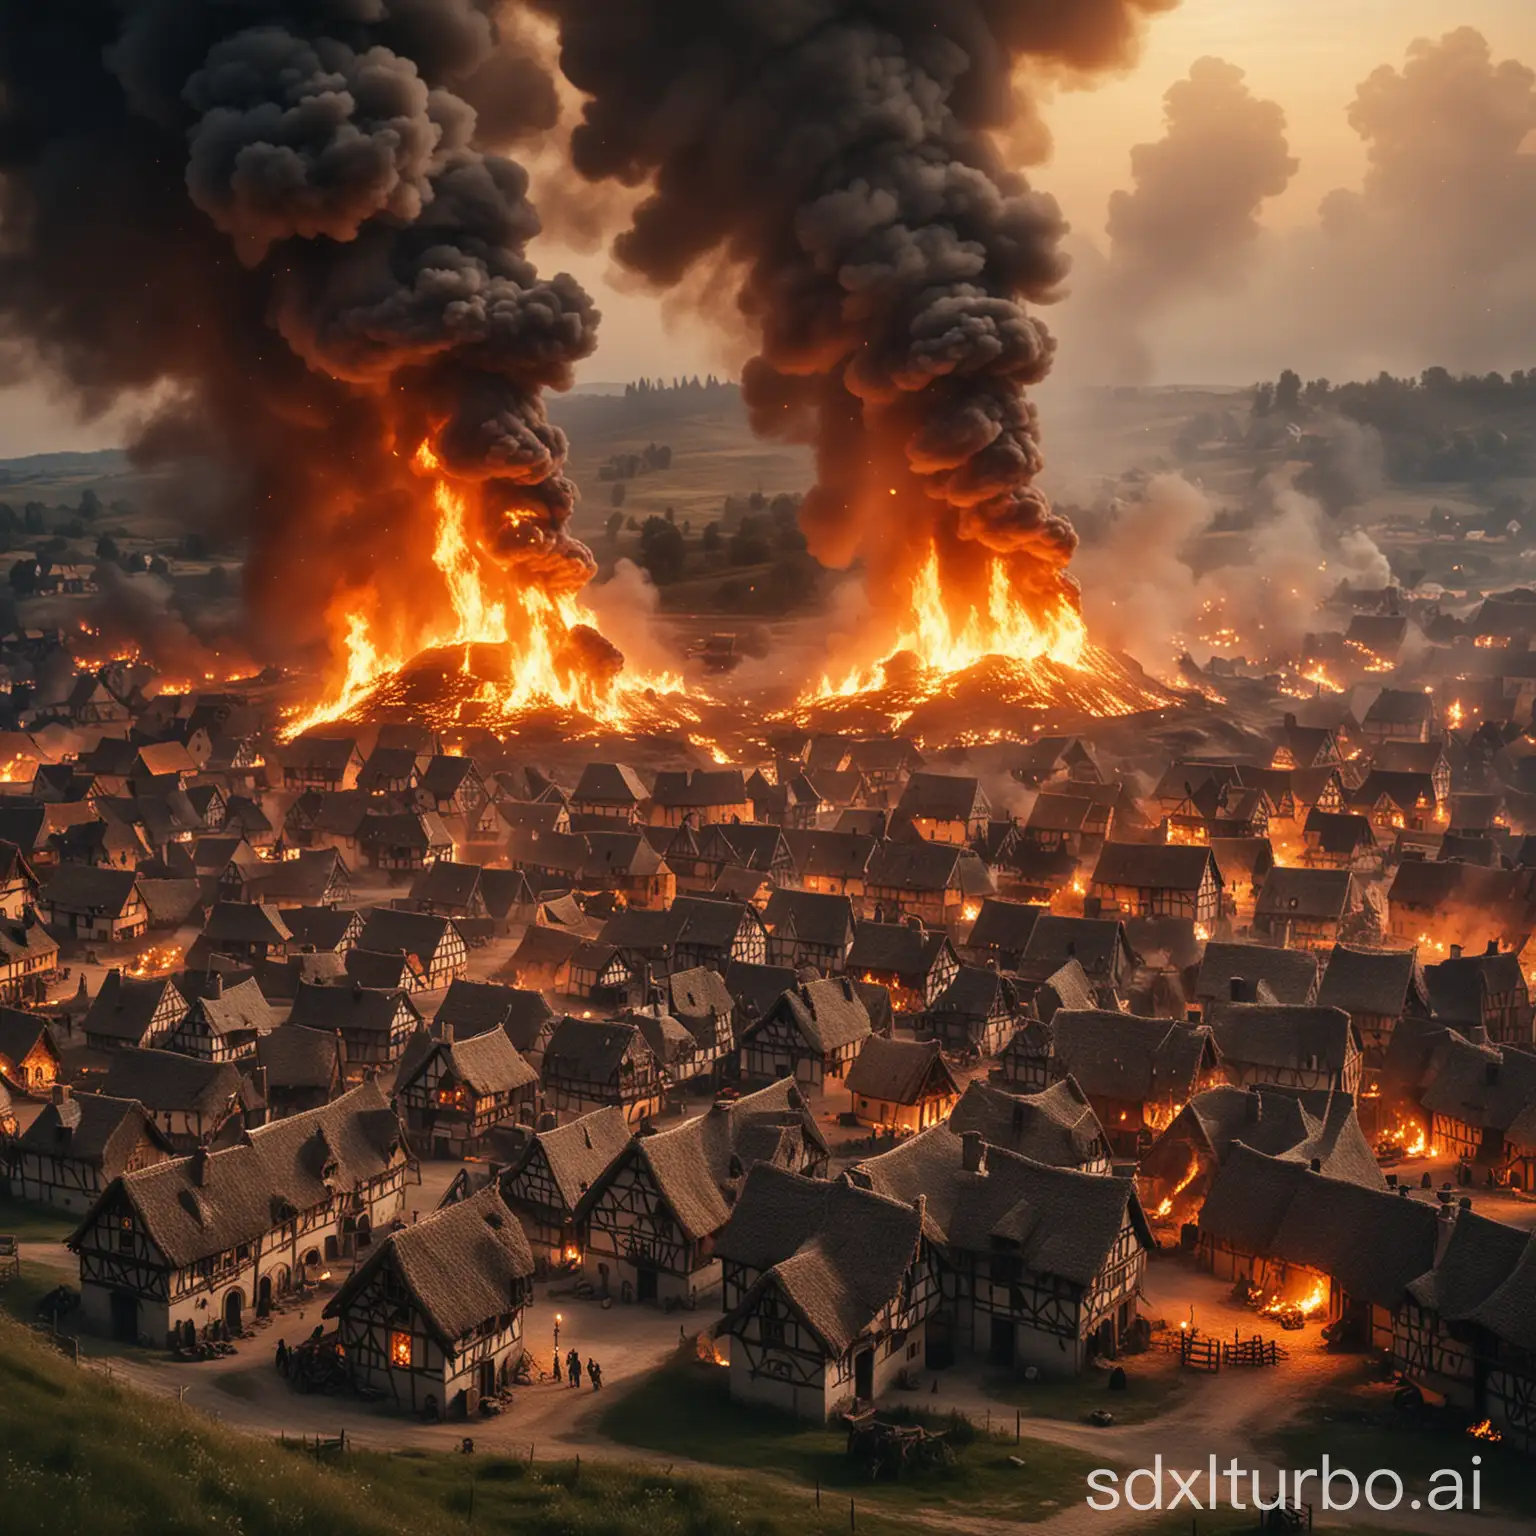 Medieval-Village-Engulfed-in-Flames-Catastrophic-Scene-of-Destruction